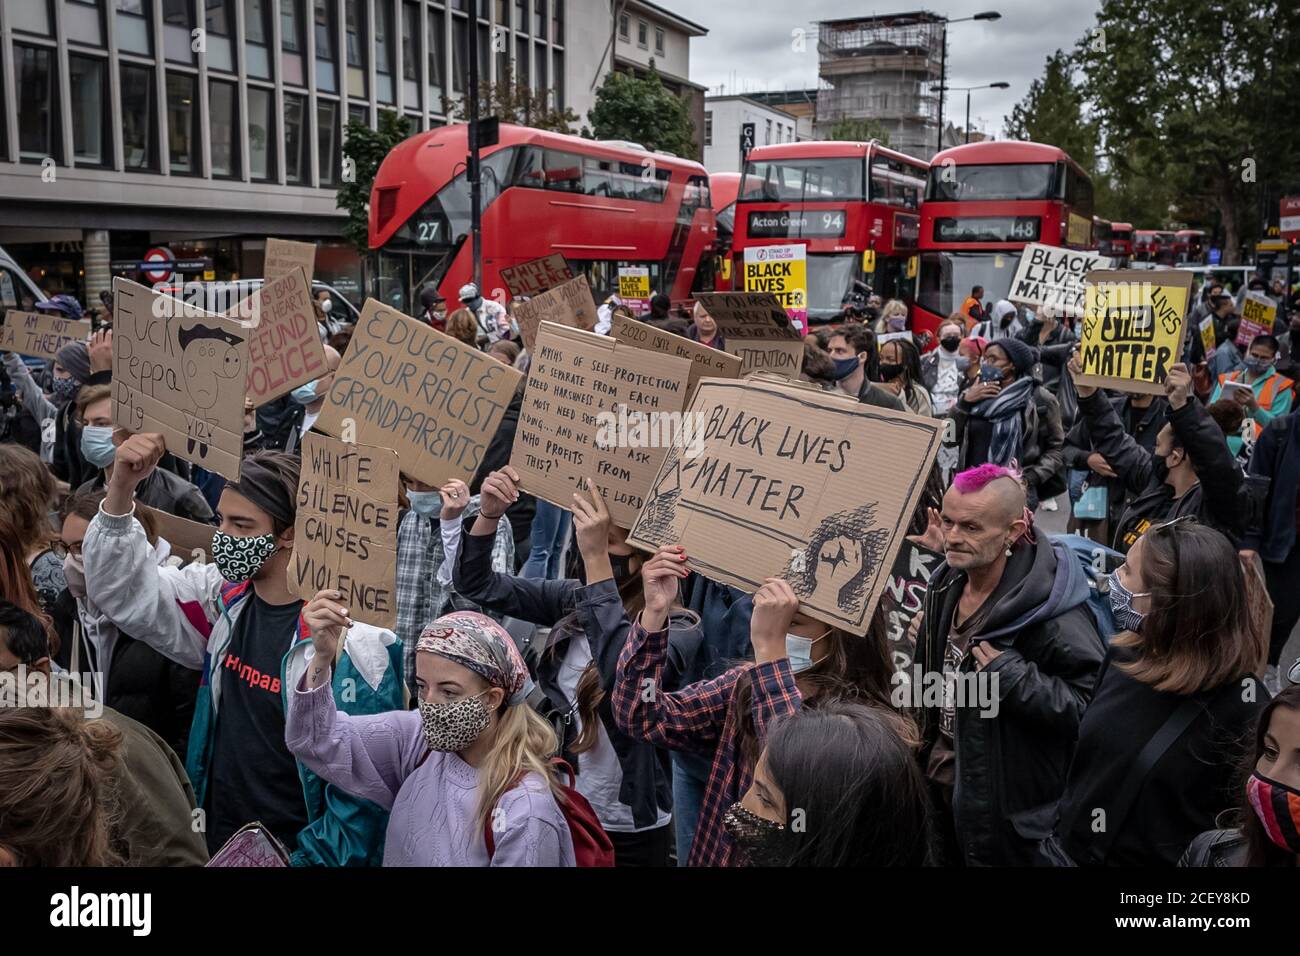 Taking The Initiative Party (TTIP) political party, inspired by the Black Lives Matter movement, protest marches from Notting Hill in London, UK. Stock Photo